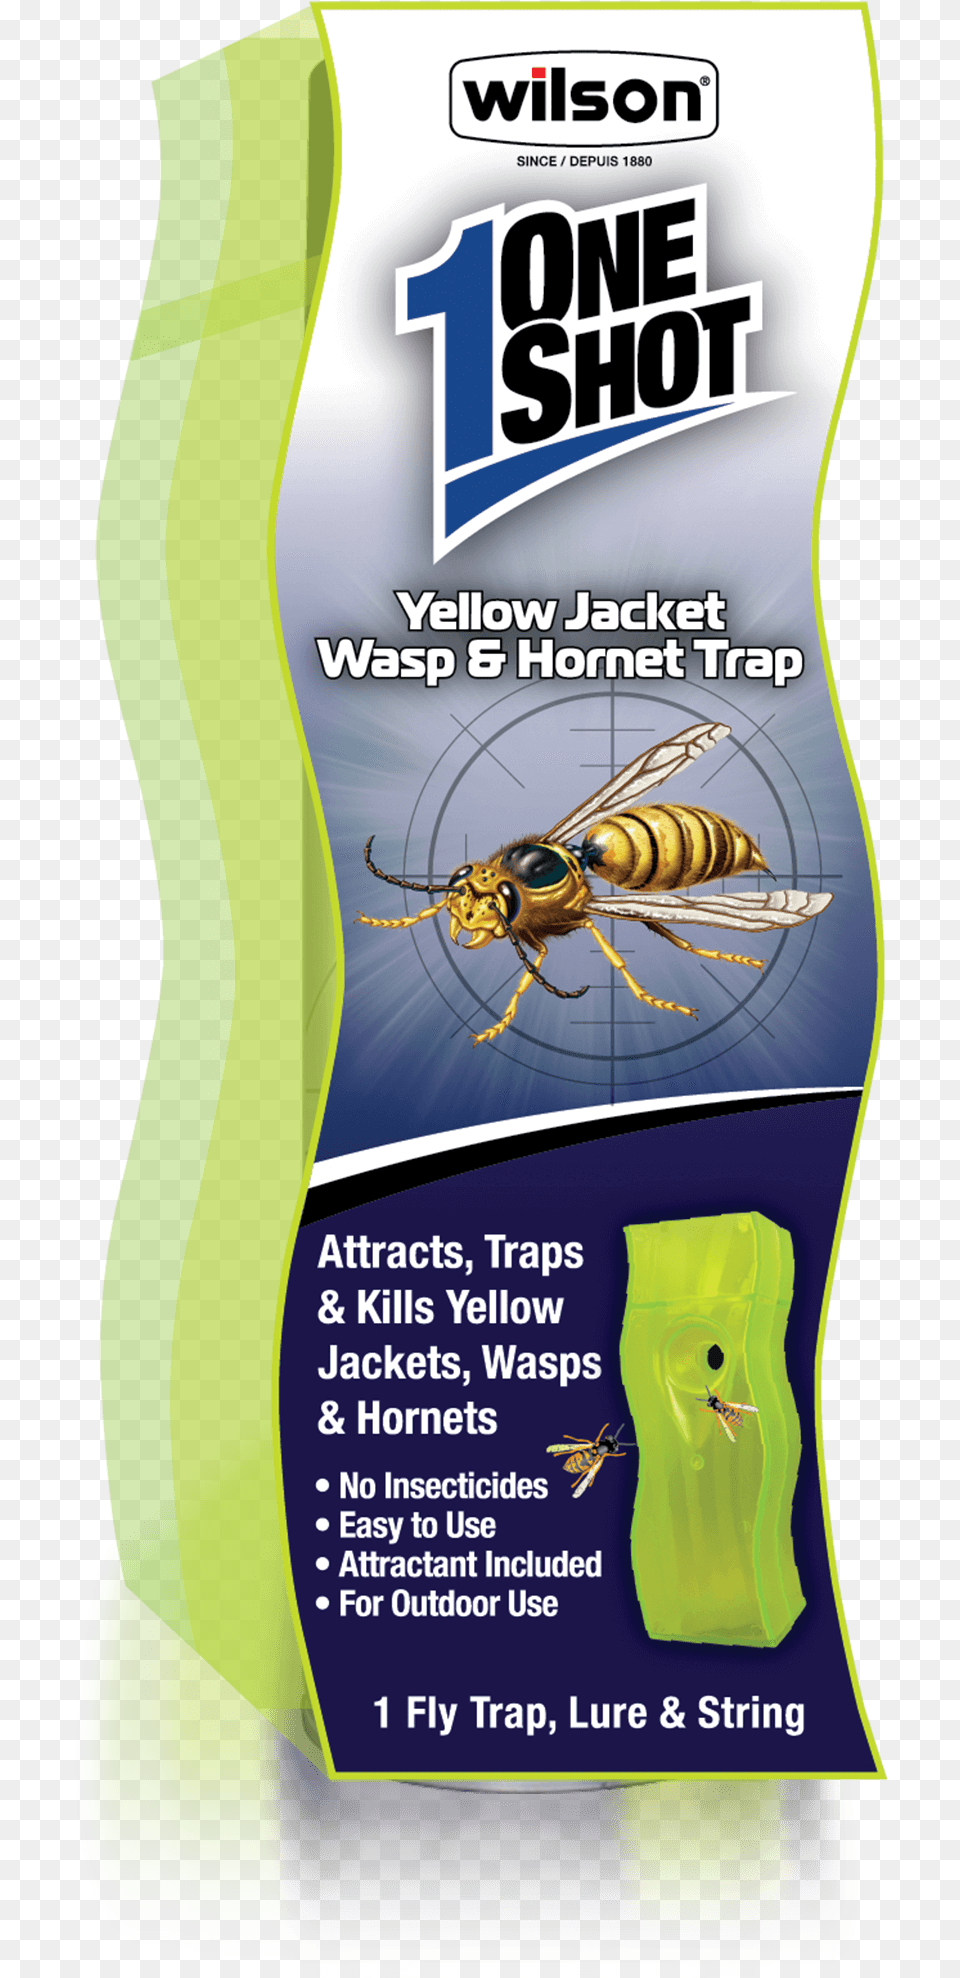 Wilson 1 Shot Jet Wasp Amp Hornet Foam Spray, Advertisement, Animal, Bee, Insect Free Png